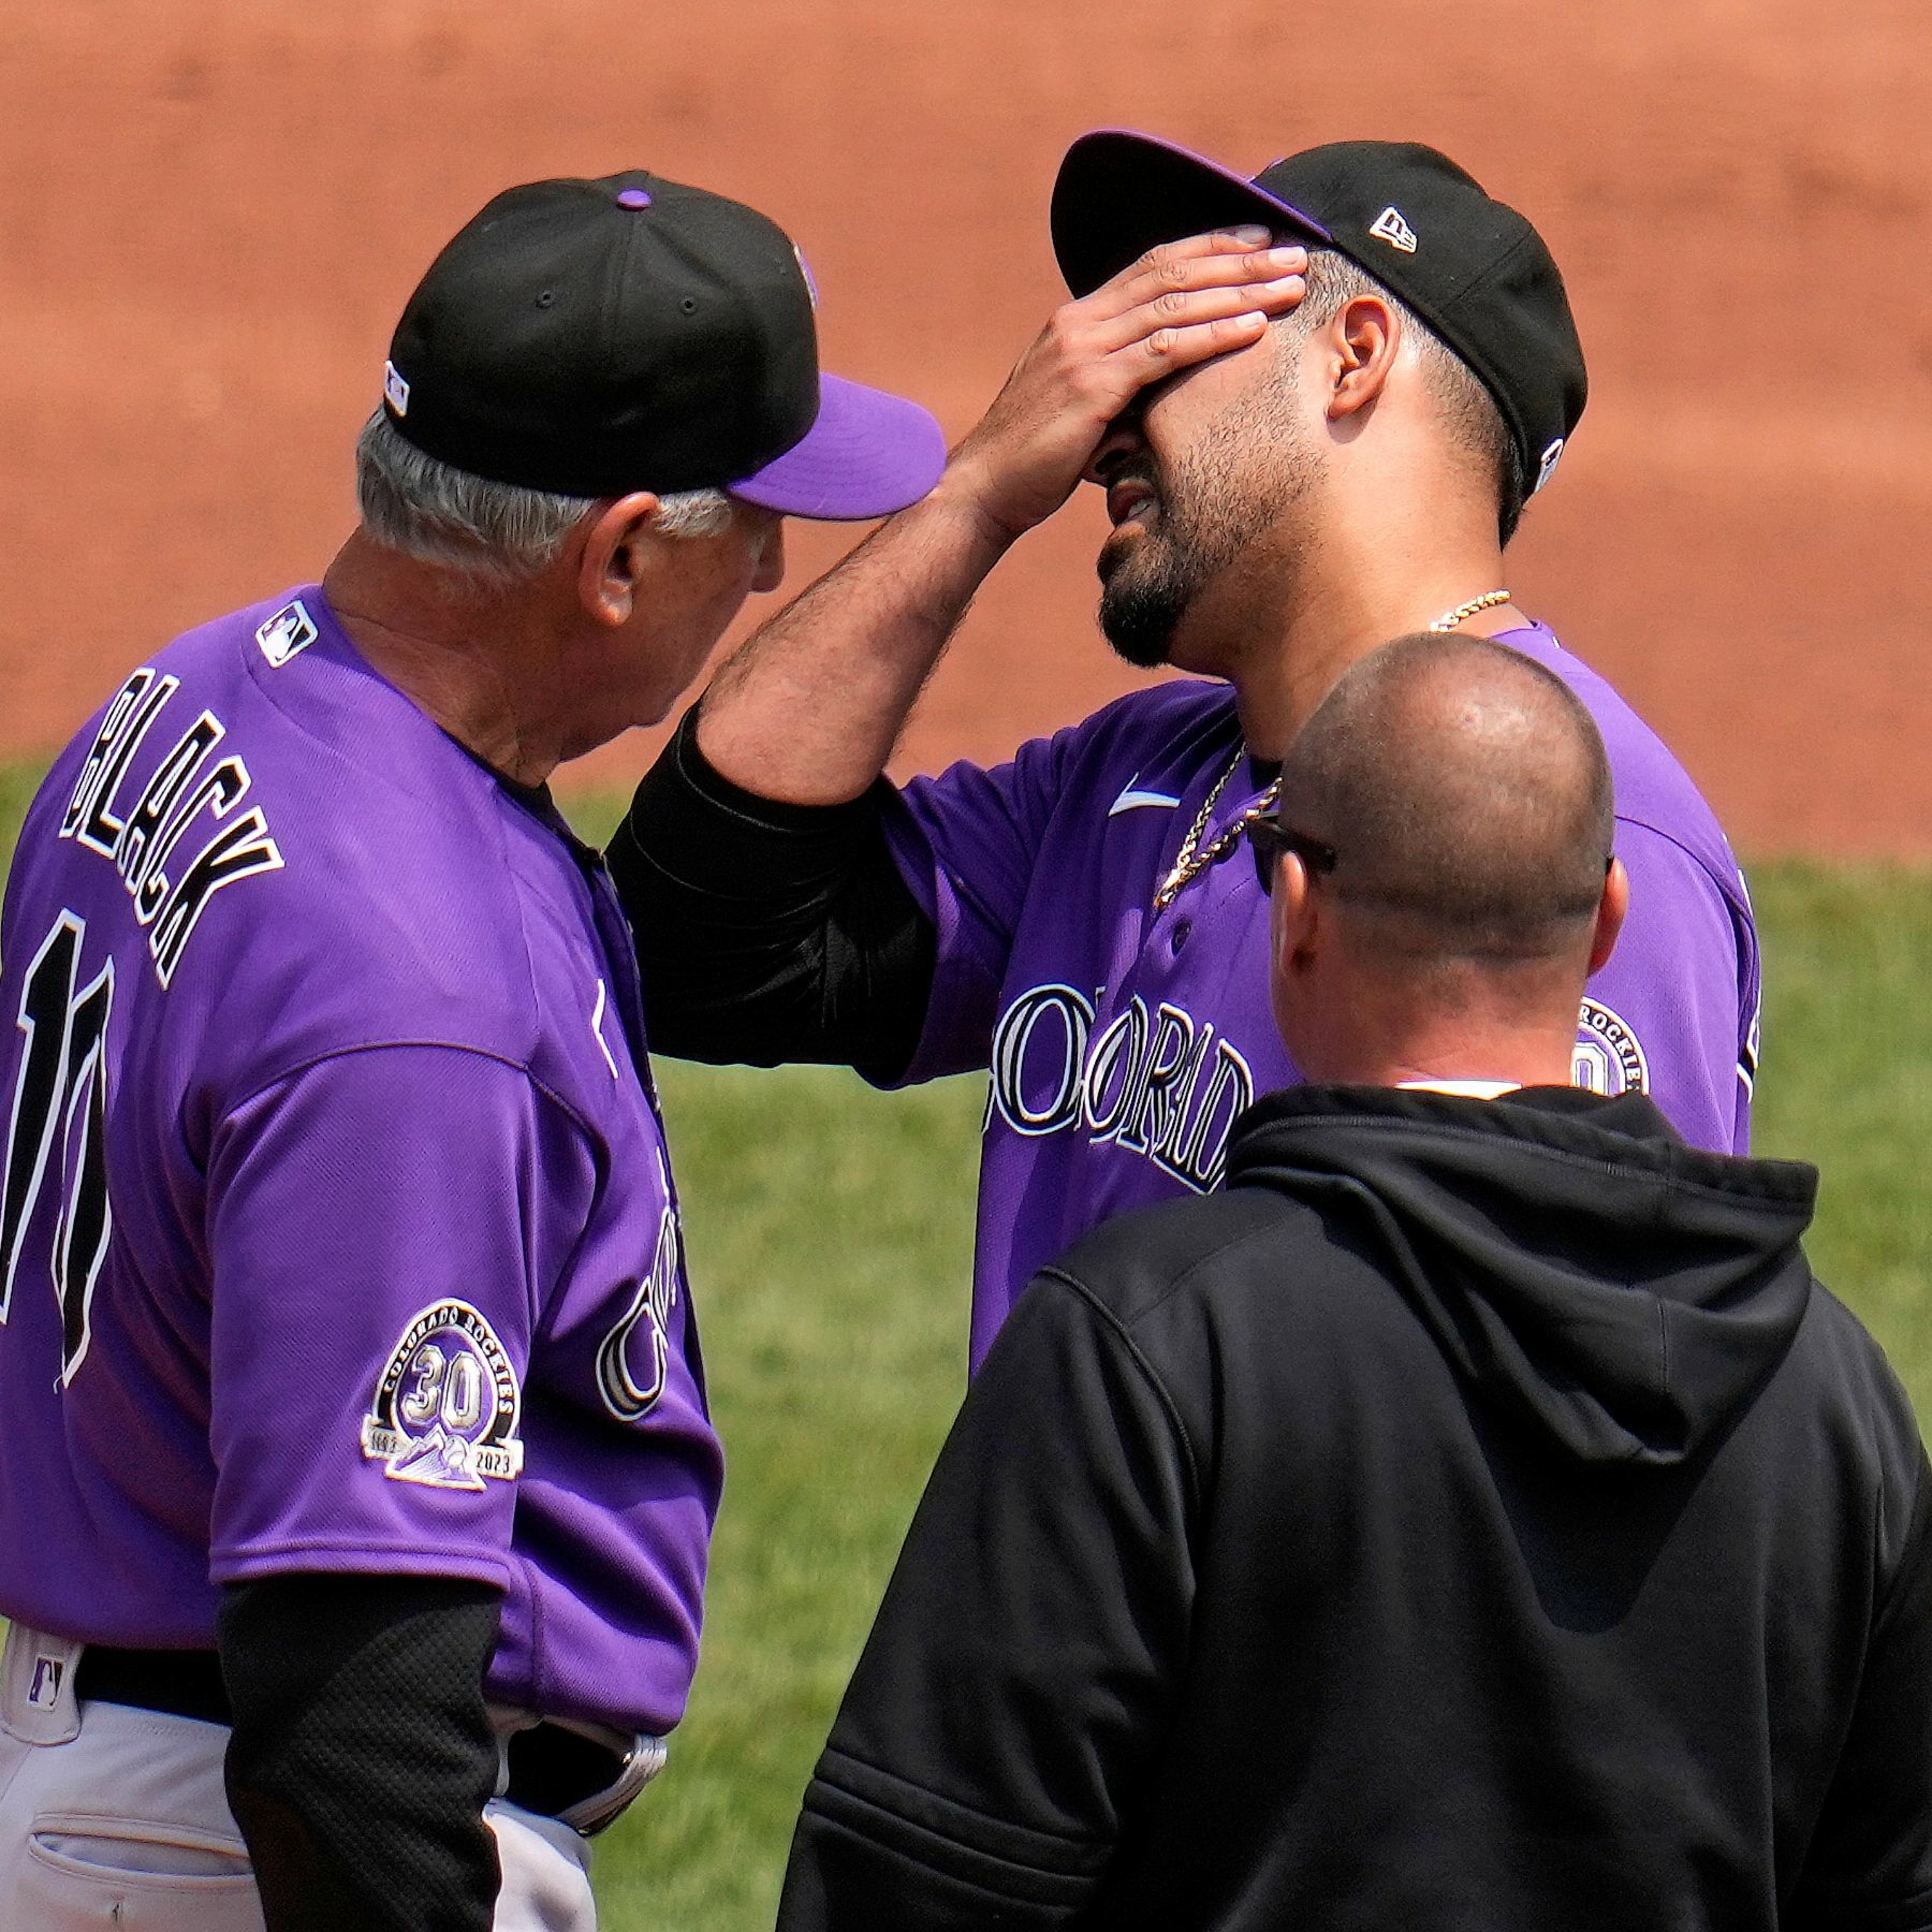 Ep. 202 -- Rockies showing some life, but see another starting pitcher injured